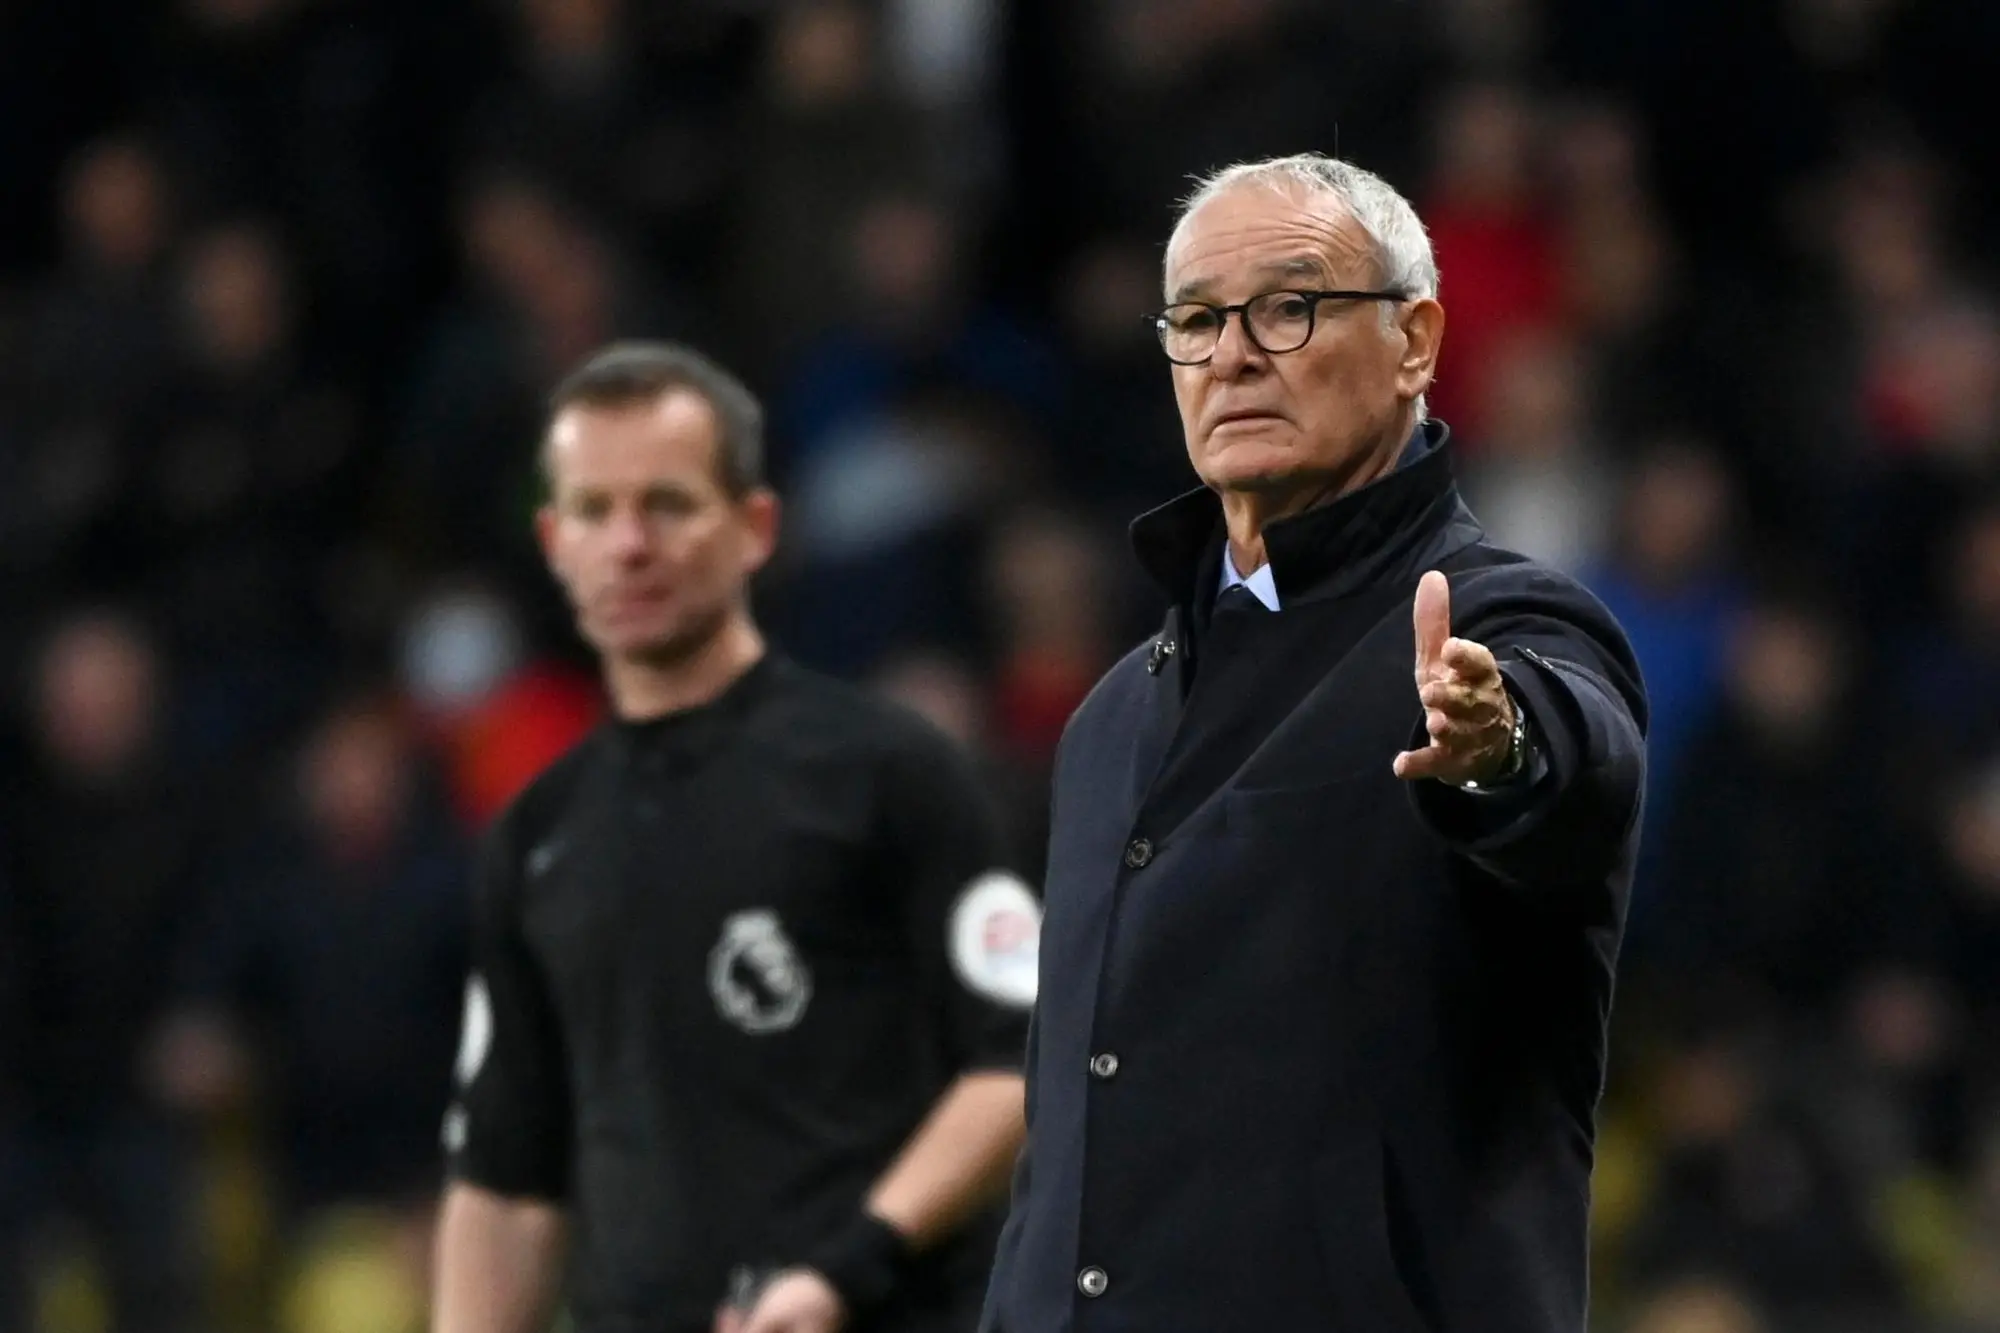 Watford's manager Claudio Ranieri (R) reacts during the English Premier League soccer match between Watford FC and Manchester United in Watford, Britain, 20 November 2021. ANSA/VICKIE FLORES EDITORIAL USE ONLY. No use with unauthorized audio, video, data, fixture lists, club/league logos or 'live' services. Online in-match use limited to 120 images, no video emulation. No use in betting, games or single club/league/player publications